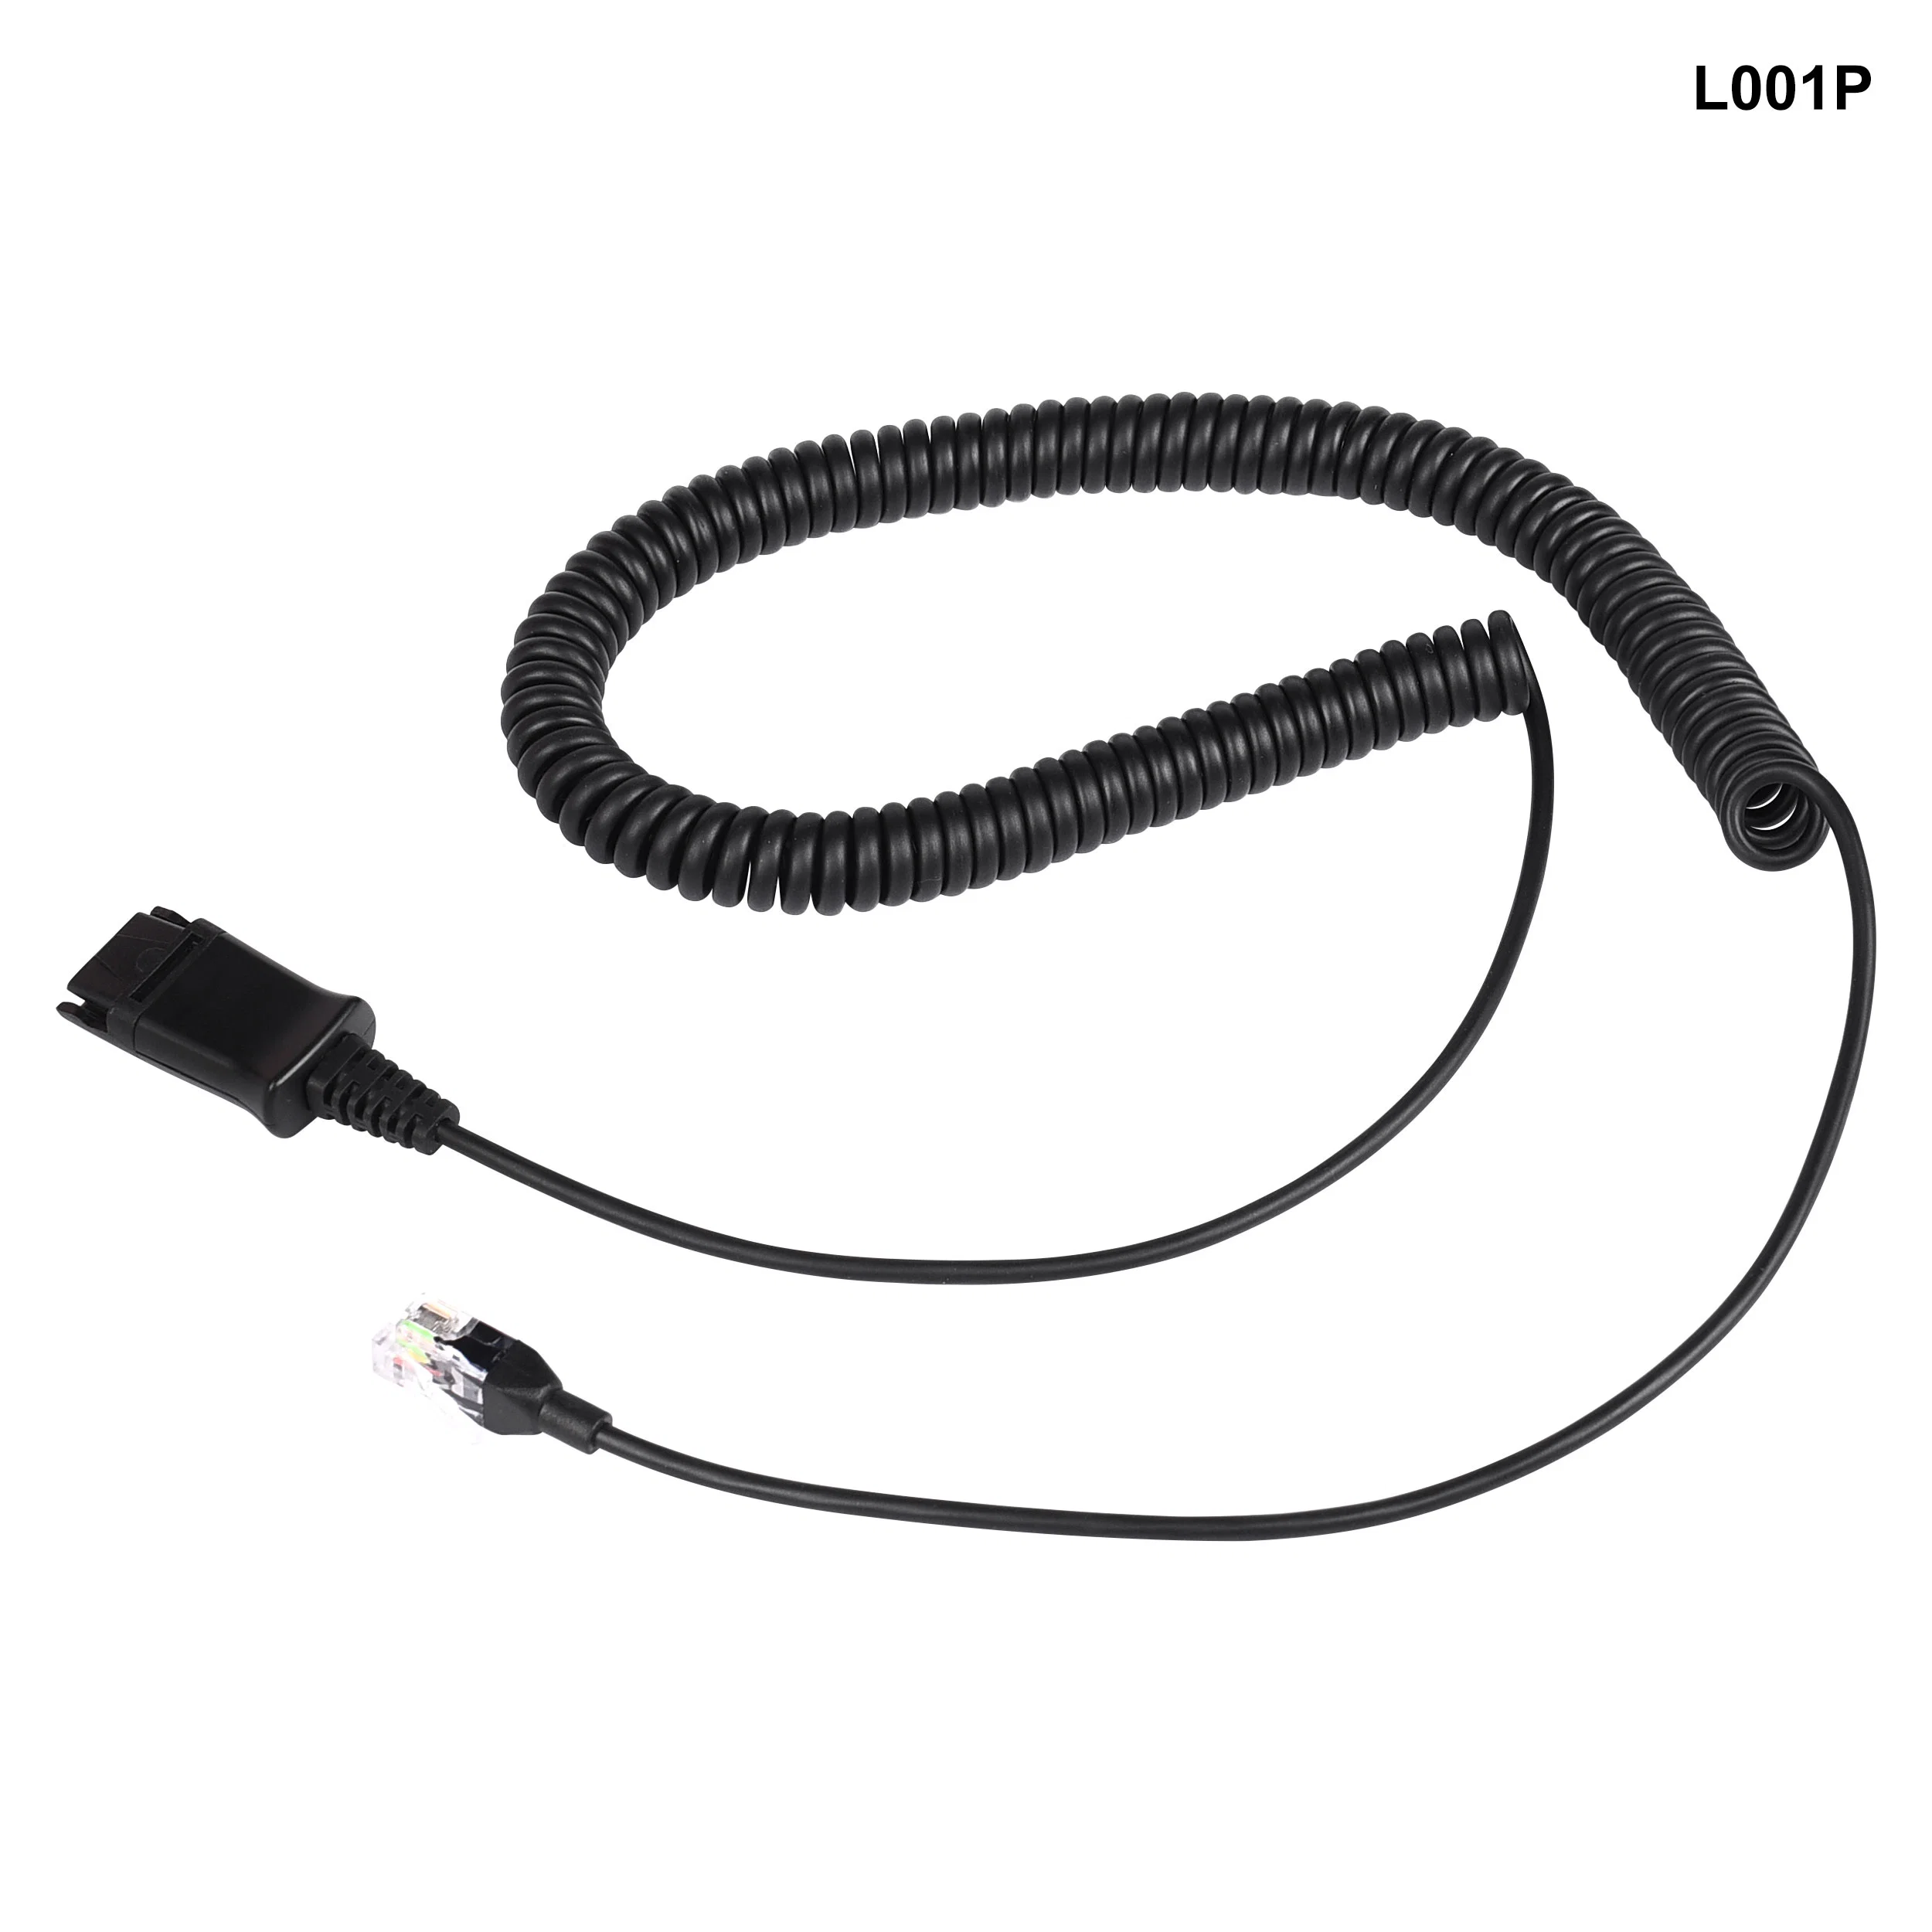 Plt Poly Gn Jabra Headaet Connector Connects to Desk Phone IP Phone